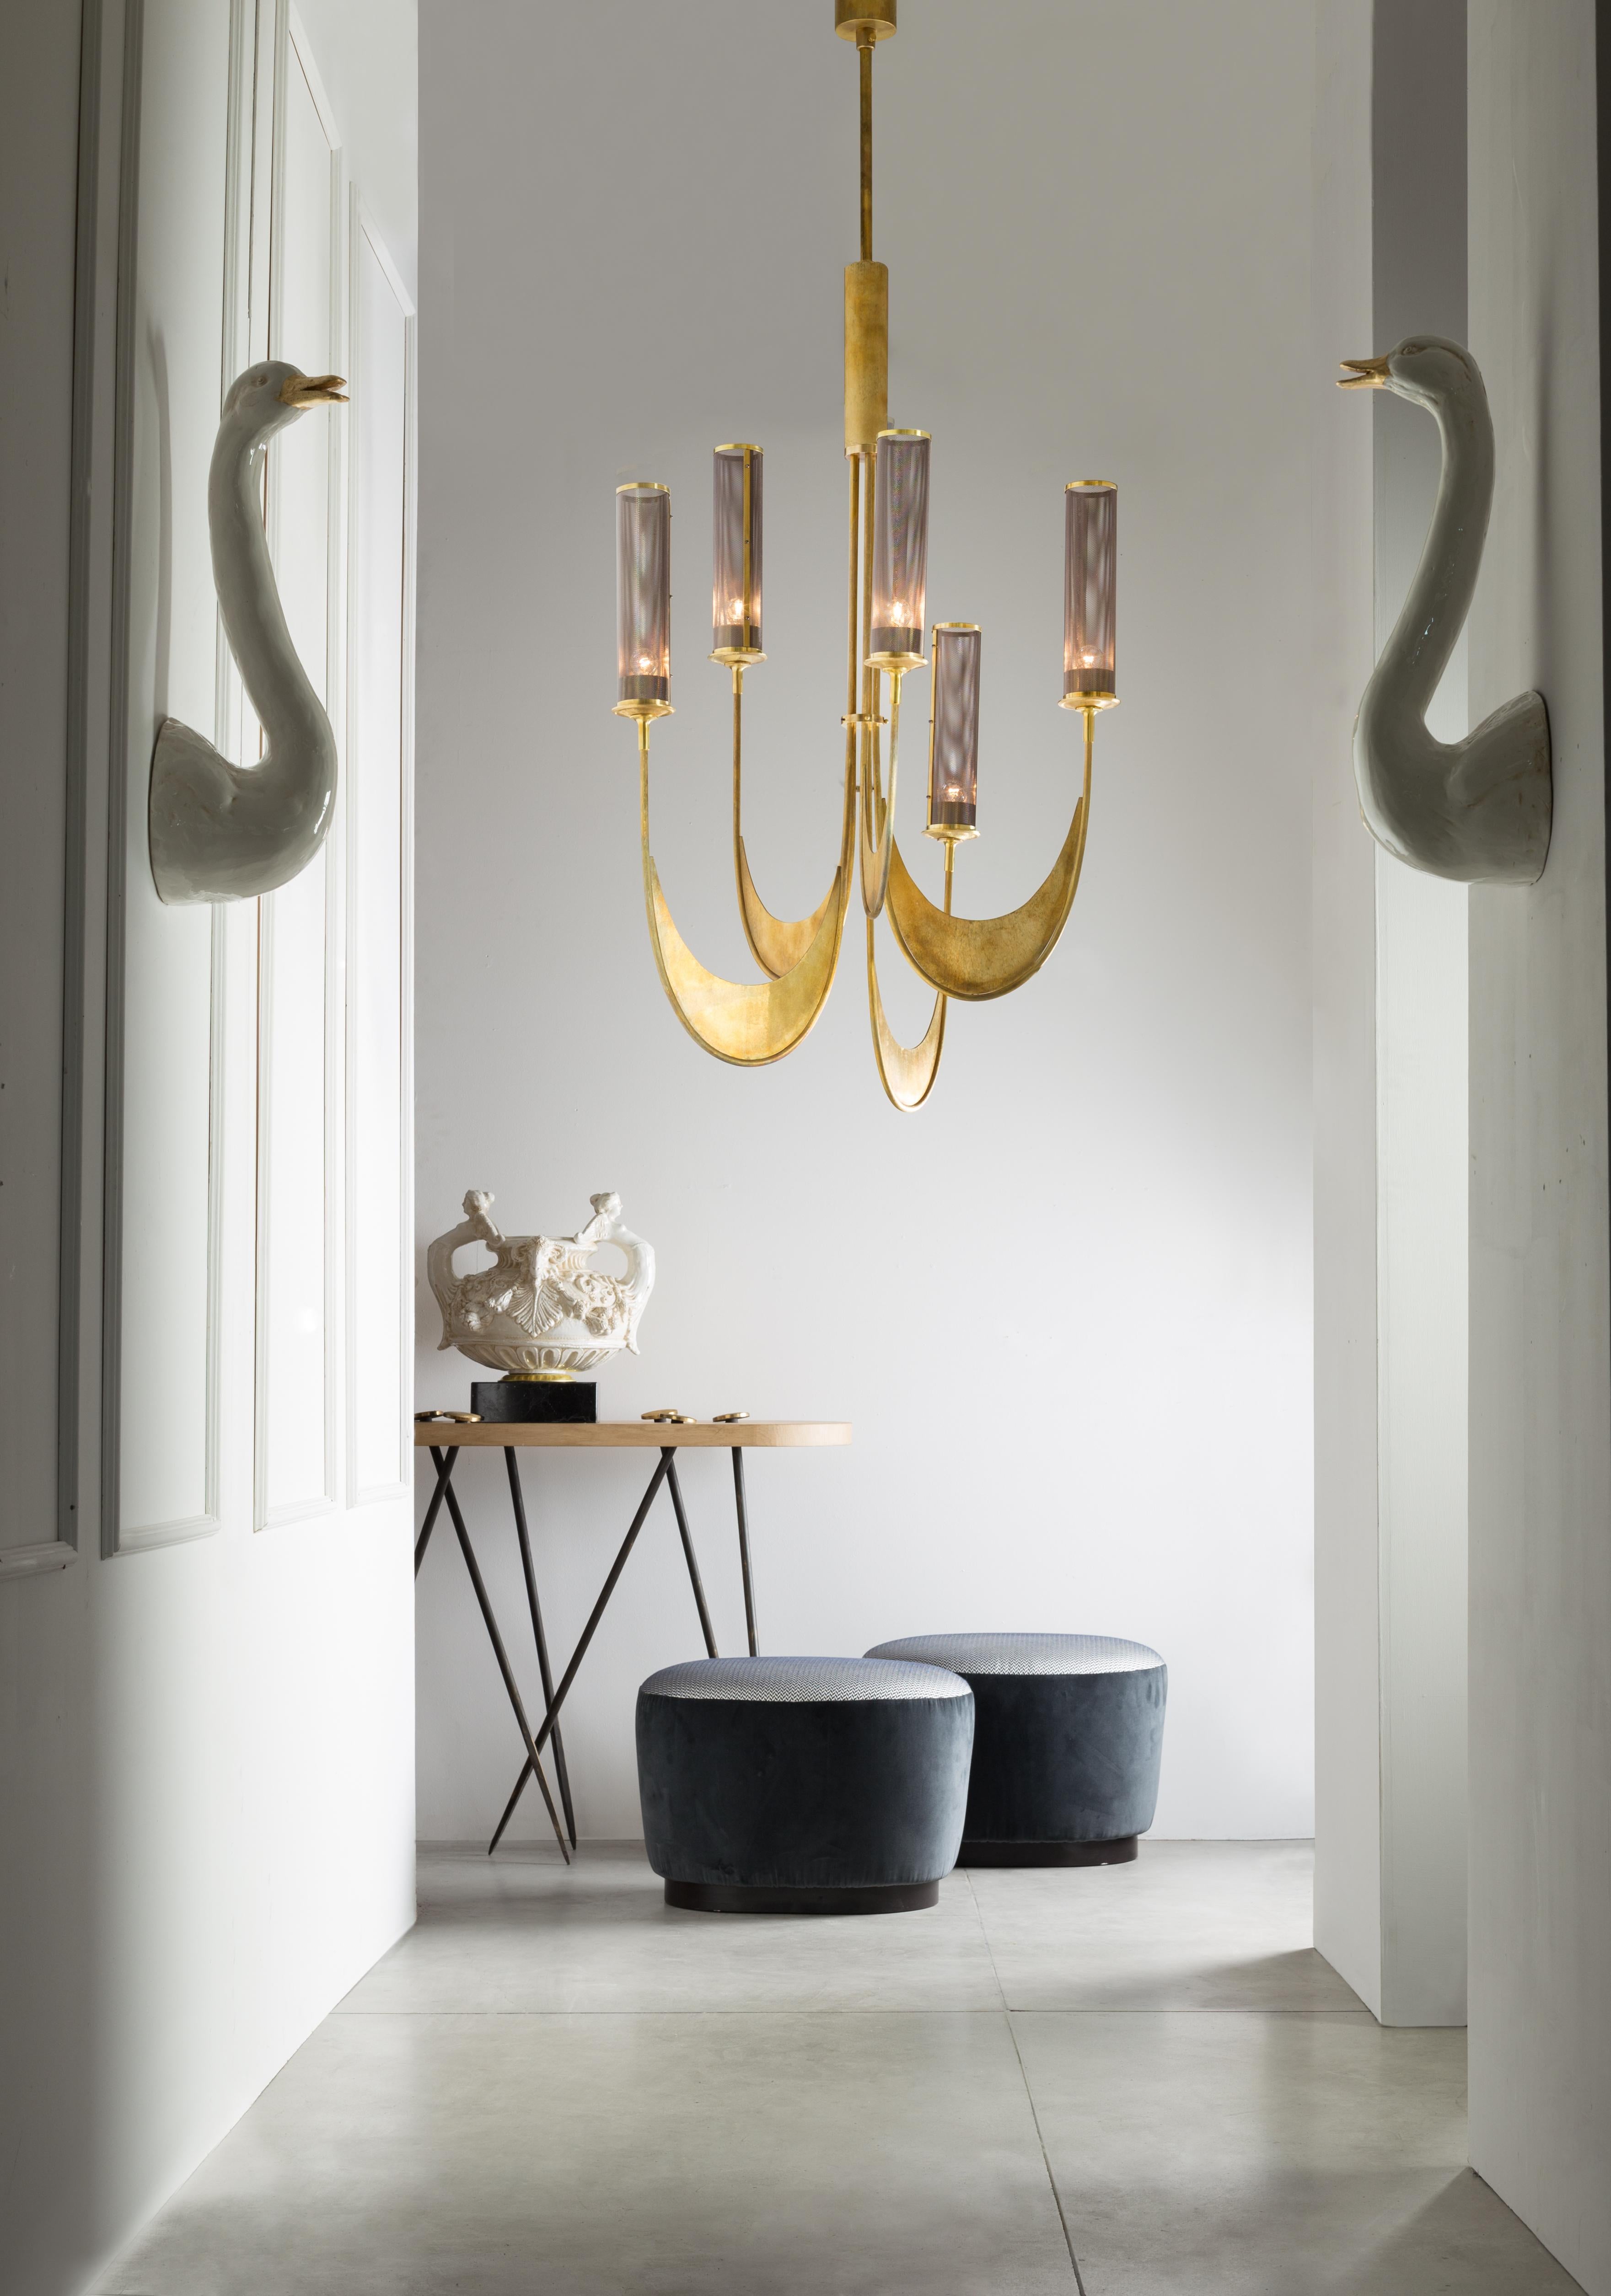 Chandelier in natural brass all engraved by hand in “Fabric Effect”. Lampshade in metal.
The height in the photo is 190cm but can be shortened to the desired size.